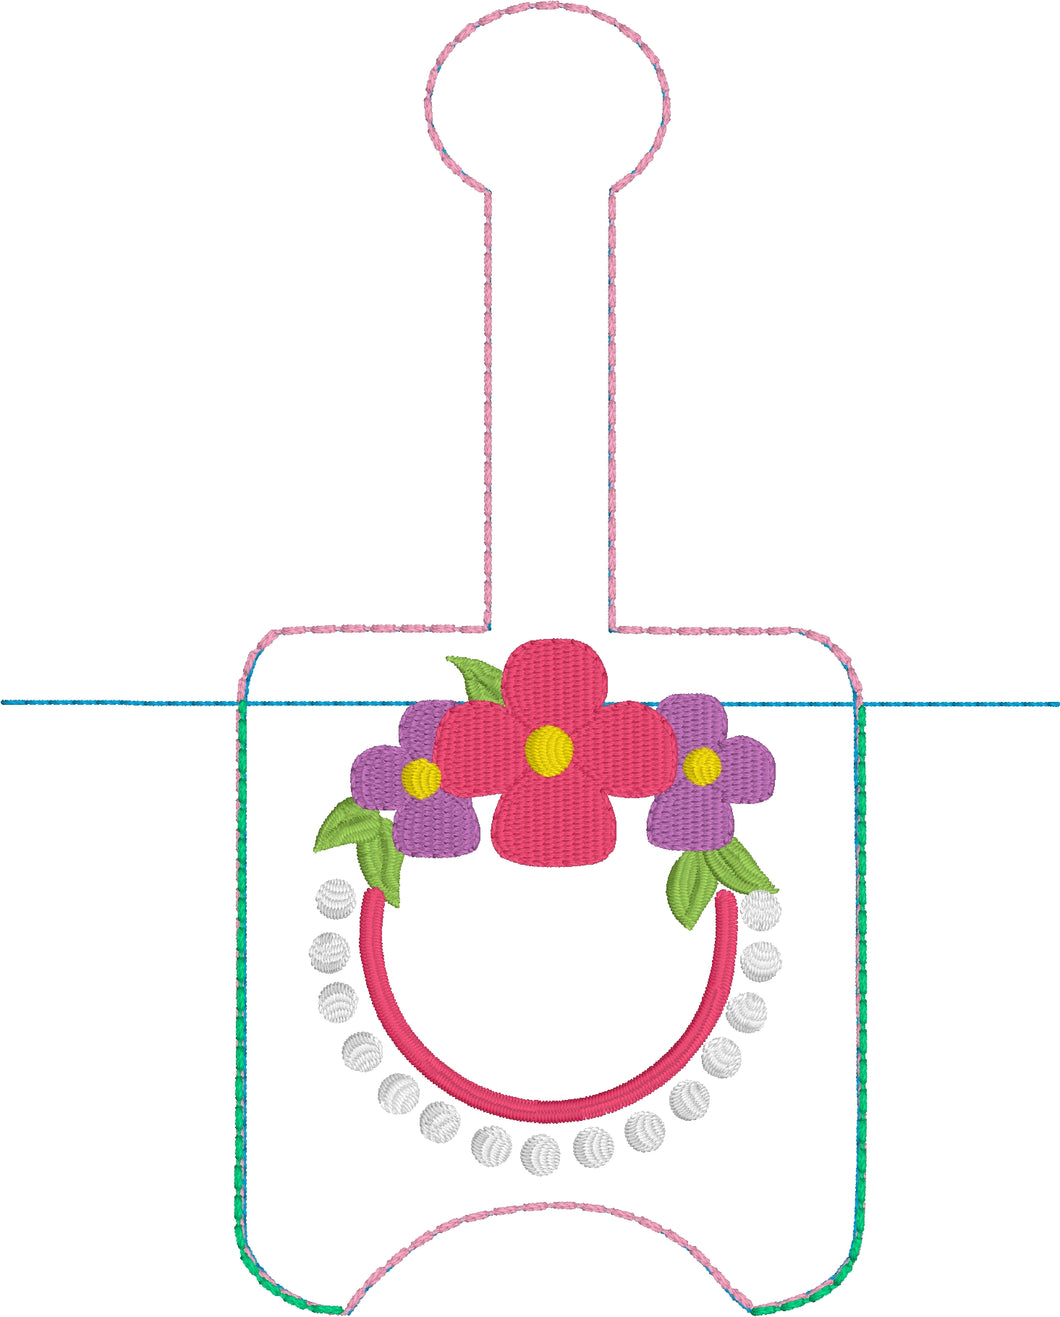 Flowers and Pearls Monogram Hand Sanitizer Holder Snap Tab Version In the Hoop Embroidery Project 2 oz DT for 5x7 hoops